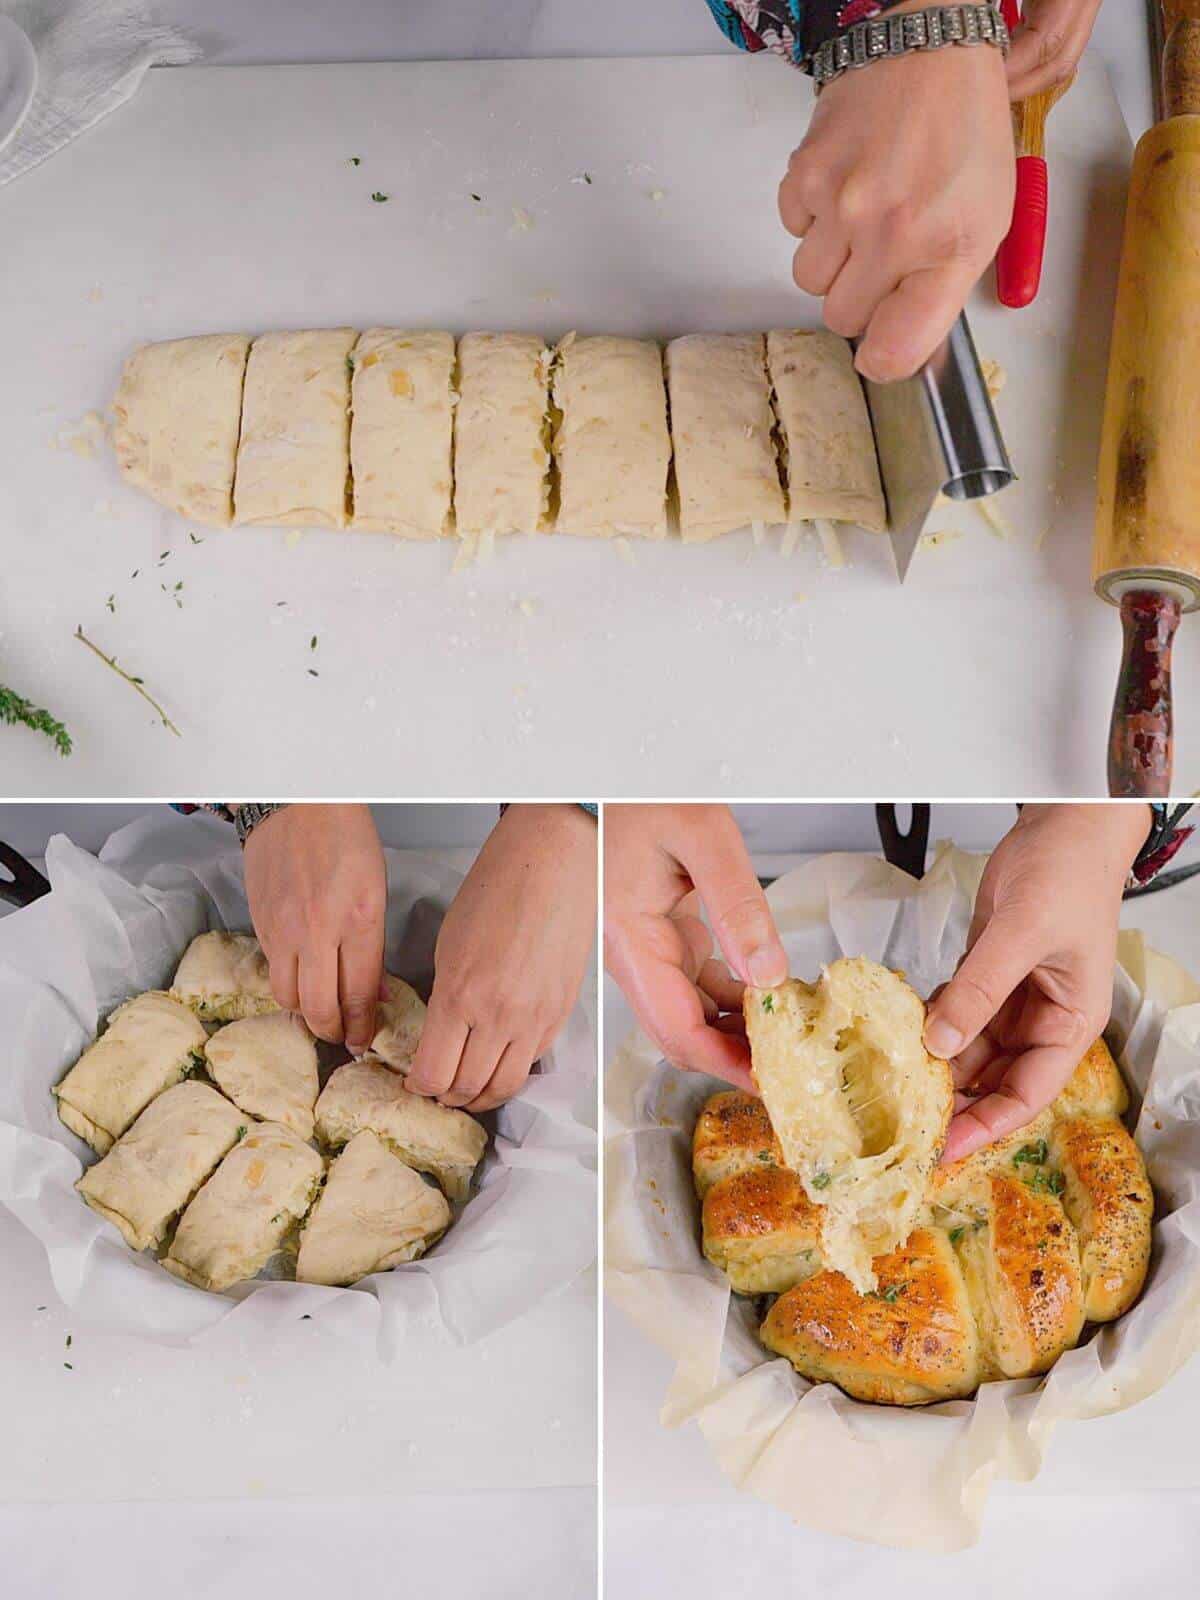 Cutting out portions of dough and baking.